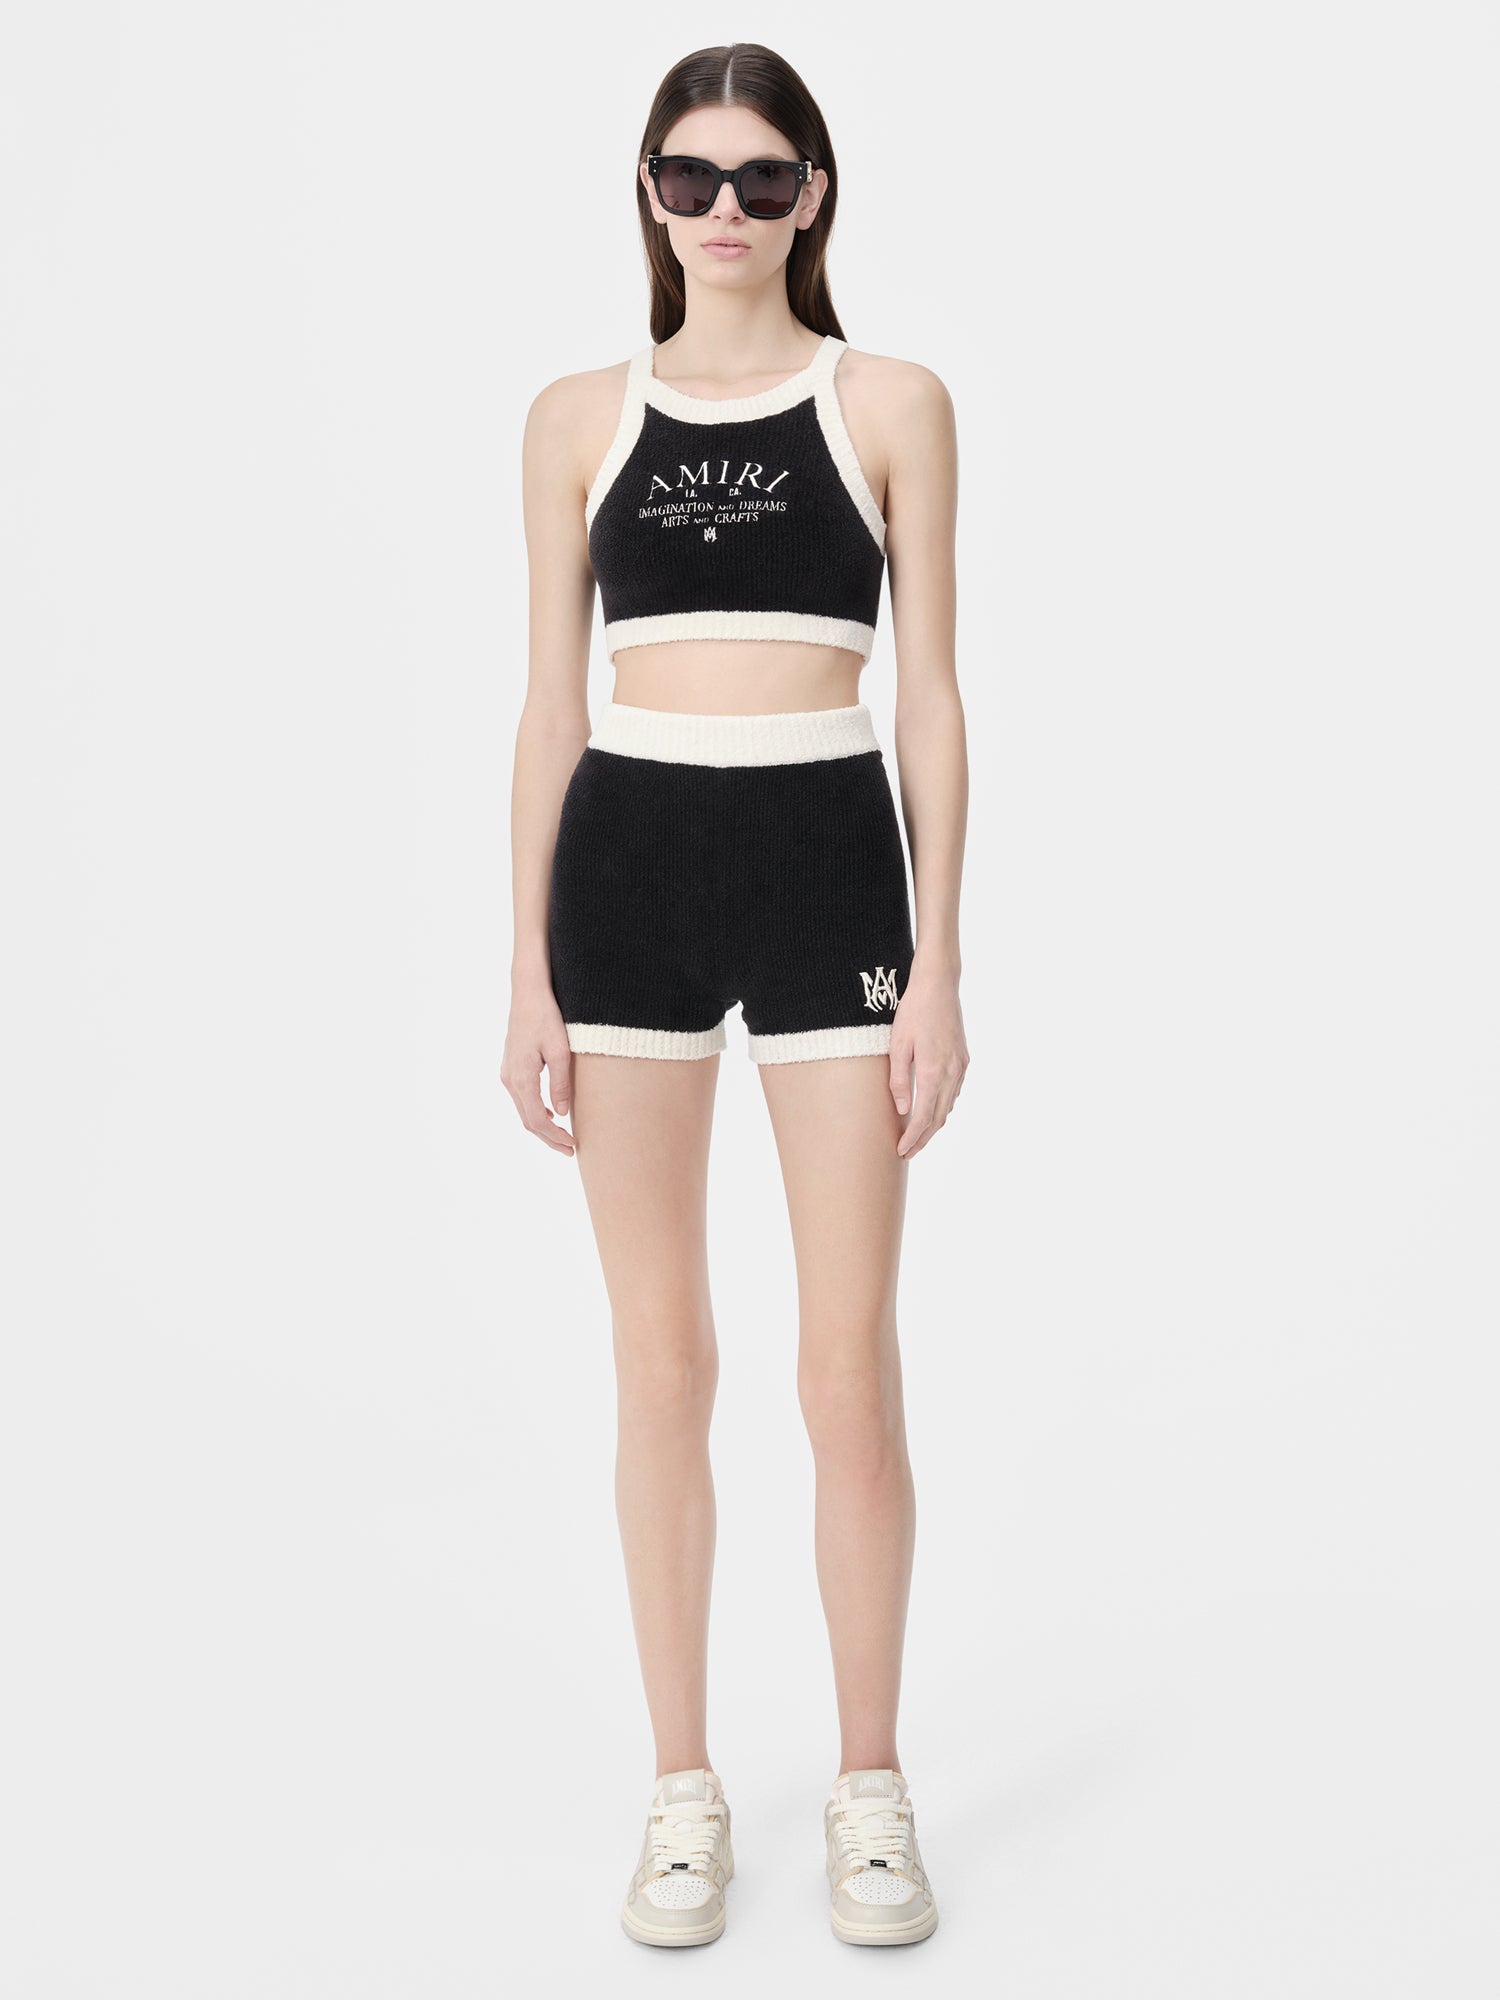 Product WOMEN - WOMEN'S MA SHORT - Black featured image